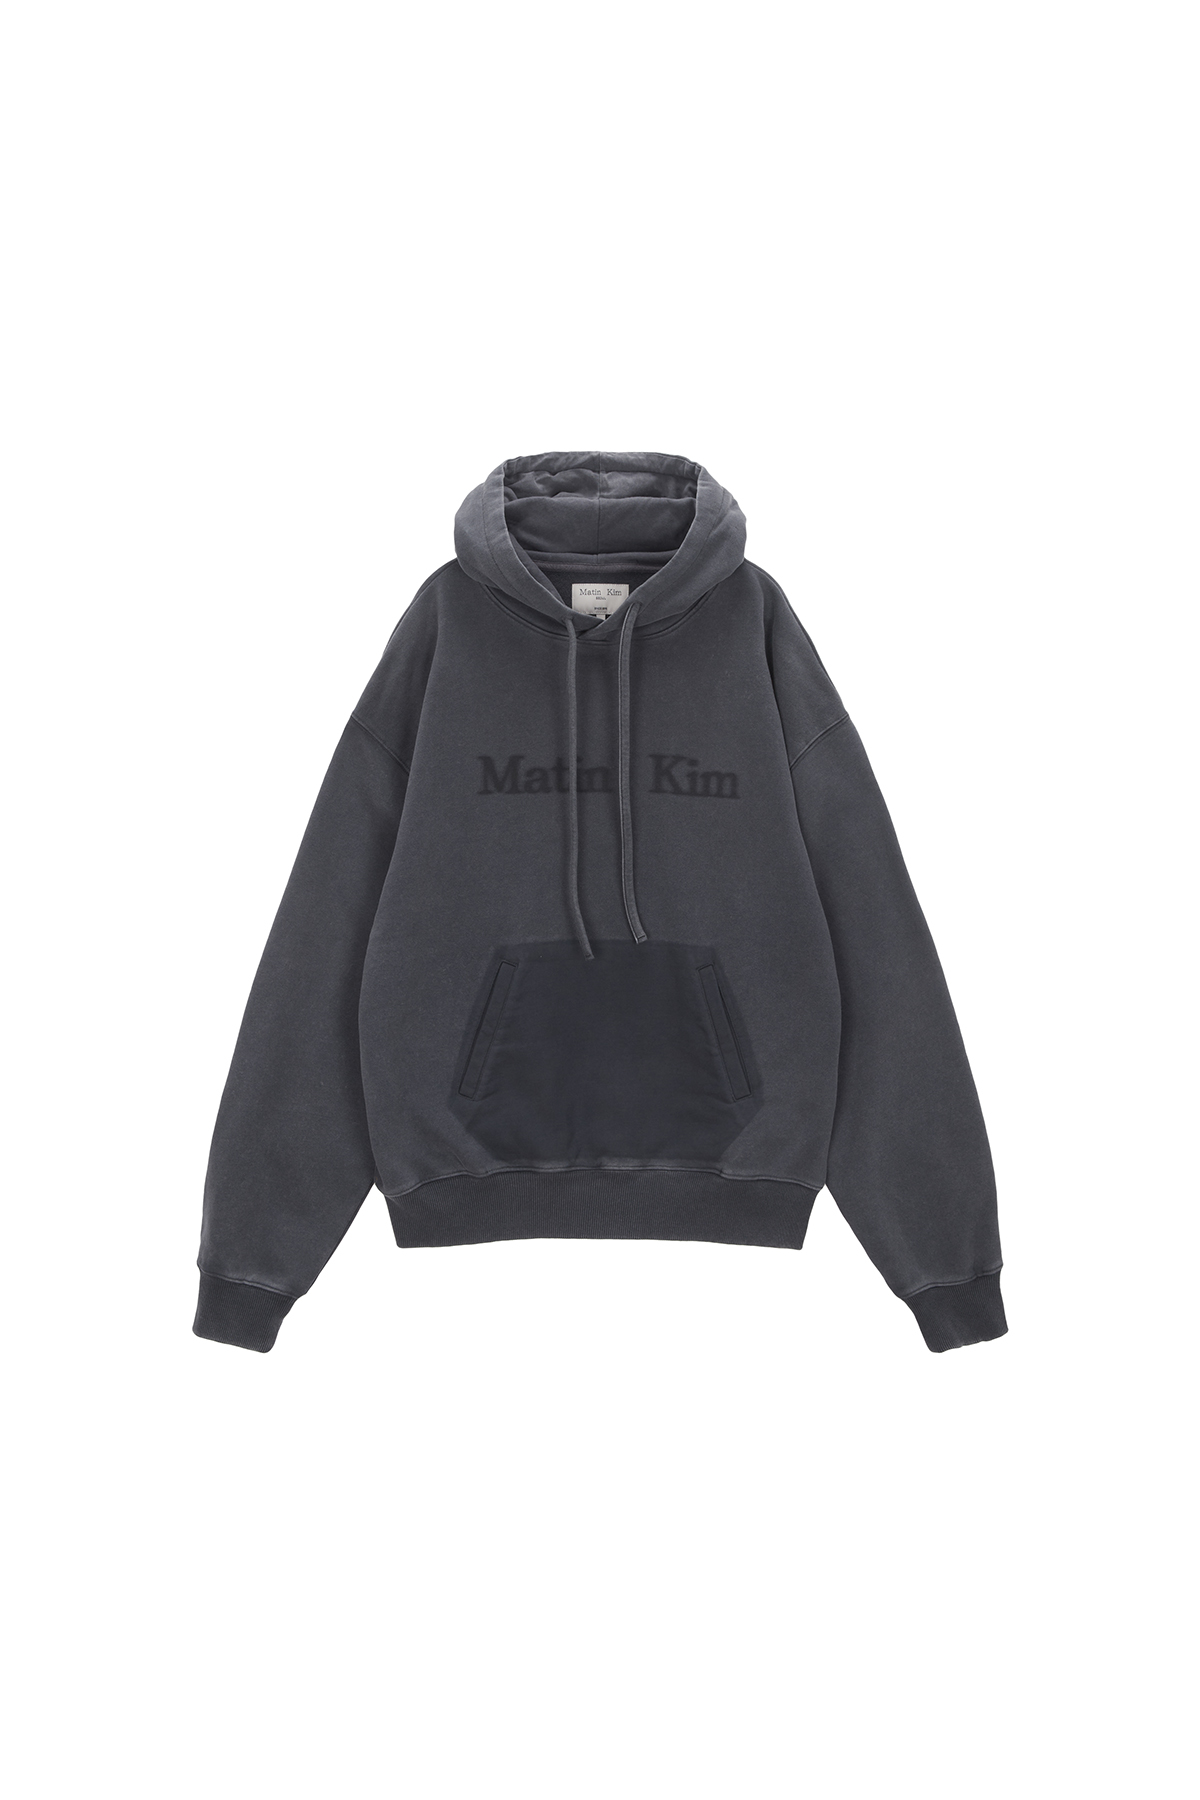 PIGMENT DYING LOGO HOODY IN CHARCOAL